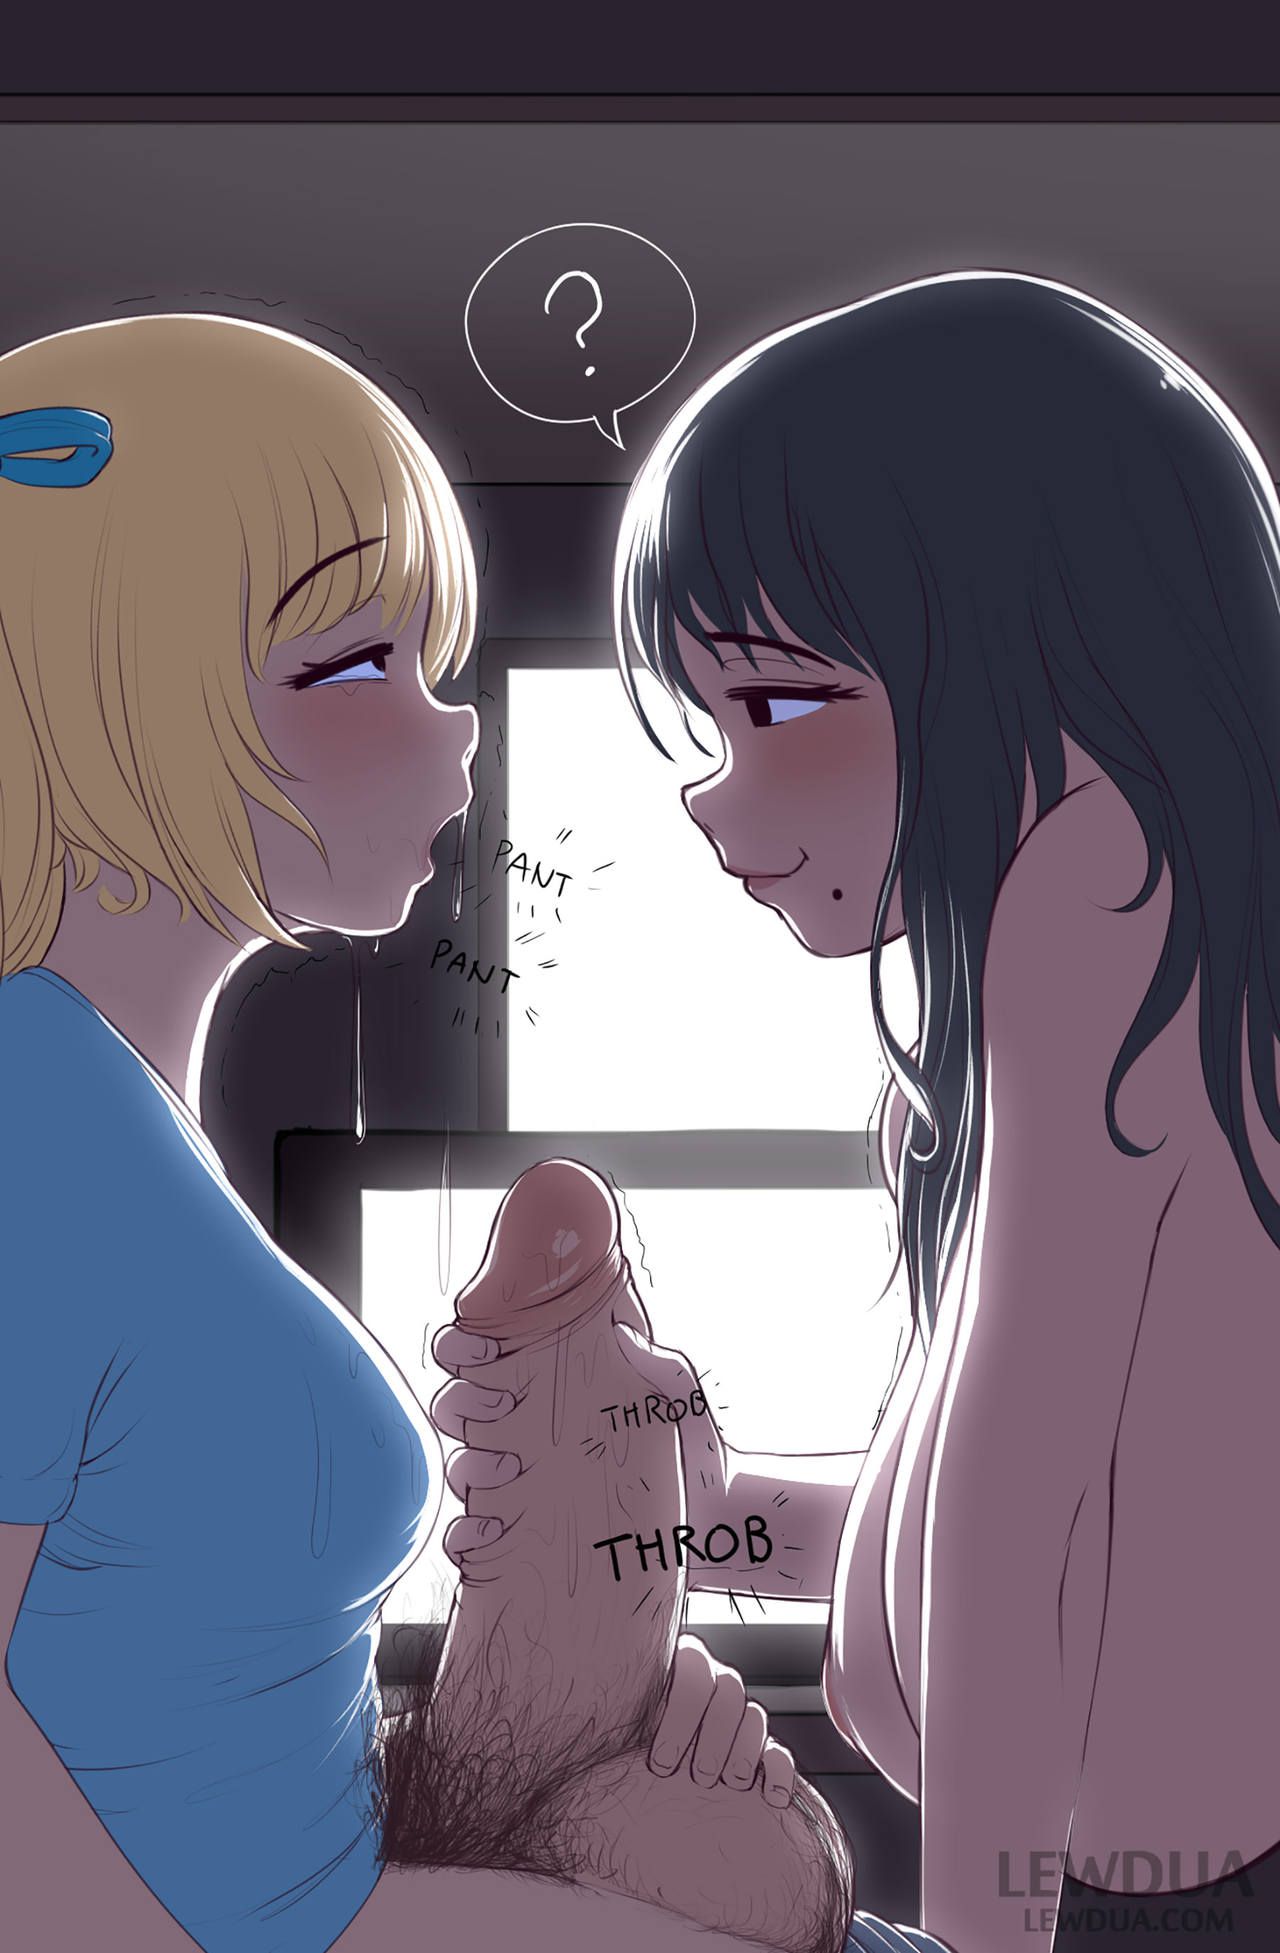 [Lewdua] Love is Sharing - Nessie and Alison 50